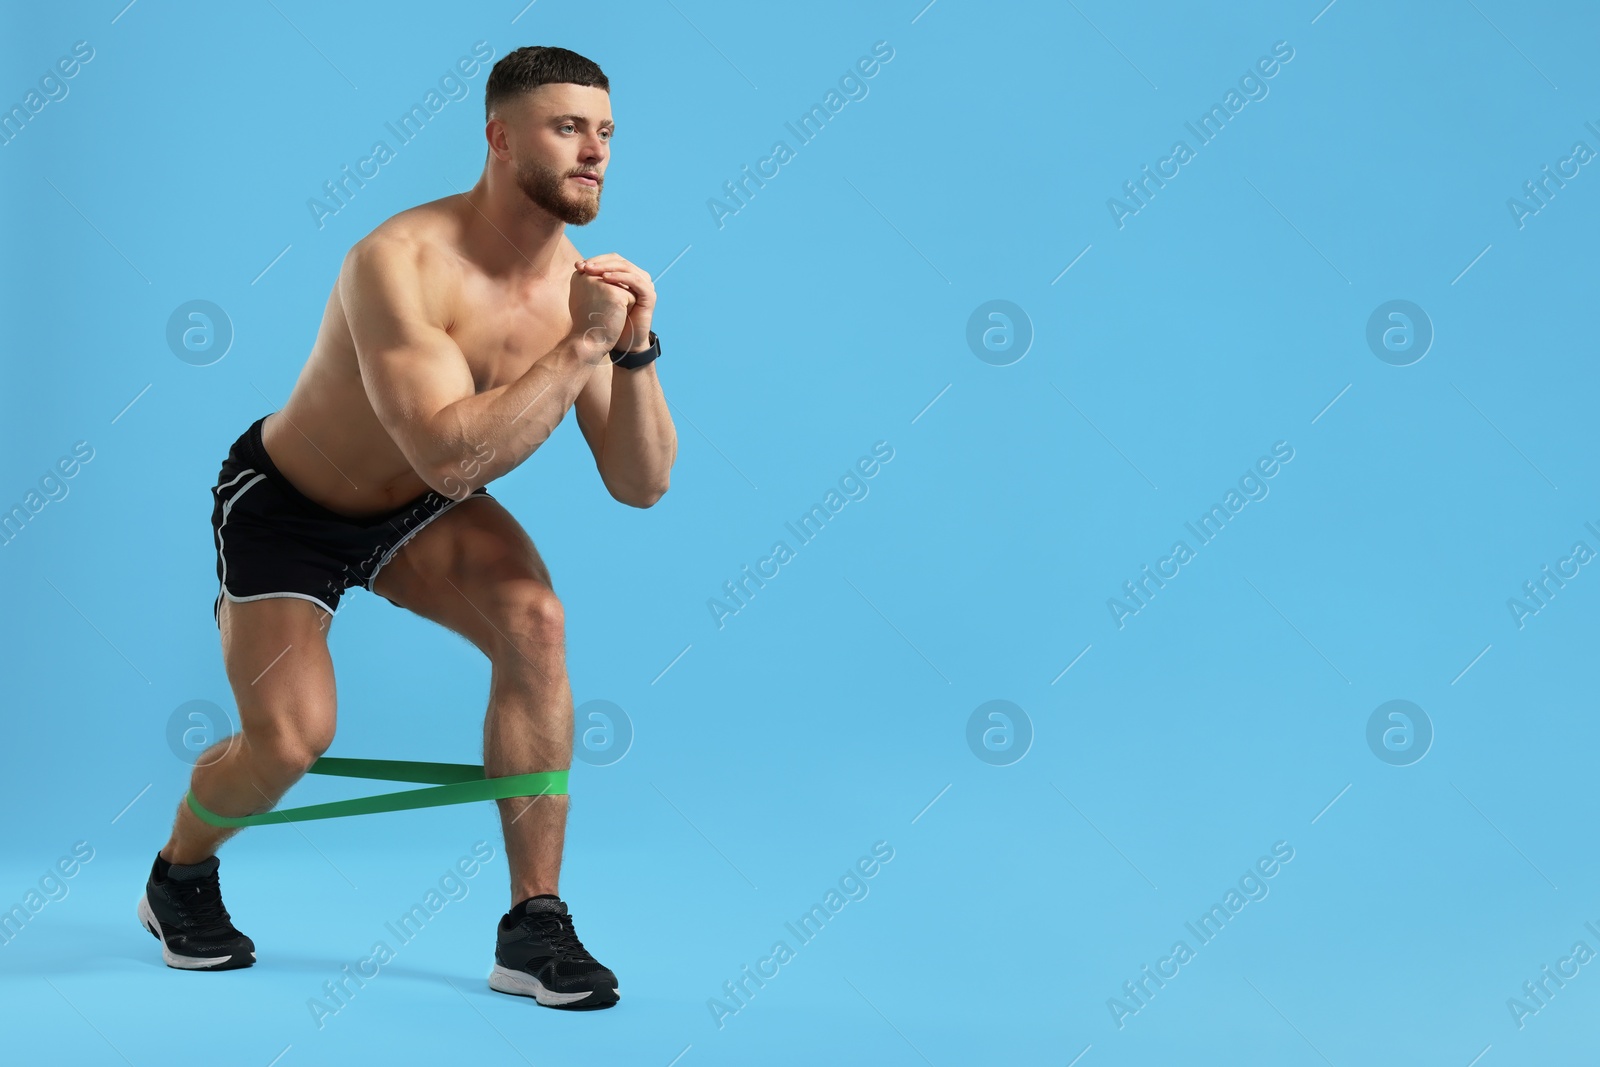 Photo of Muscular man exercising with elastic resistance band on light blue background. Space for text